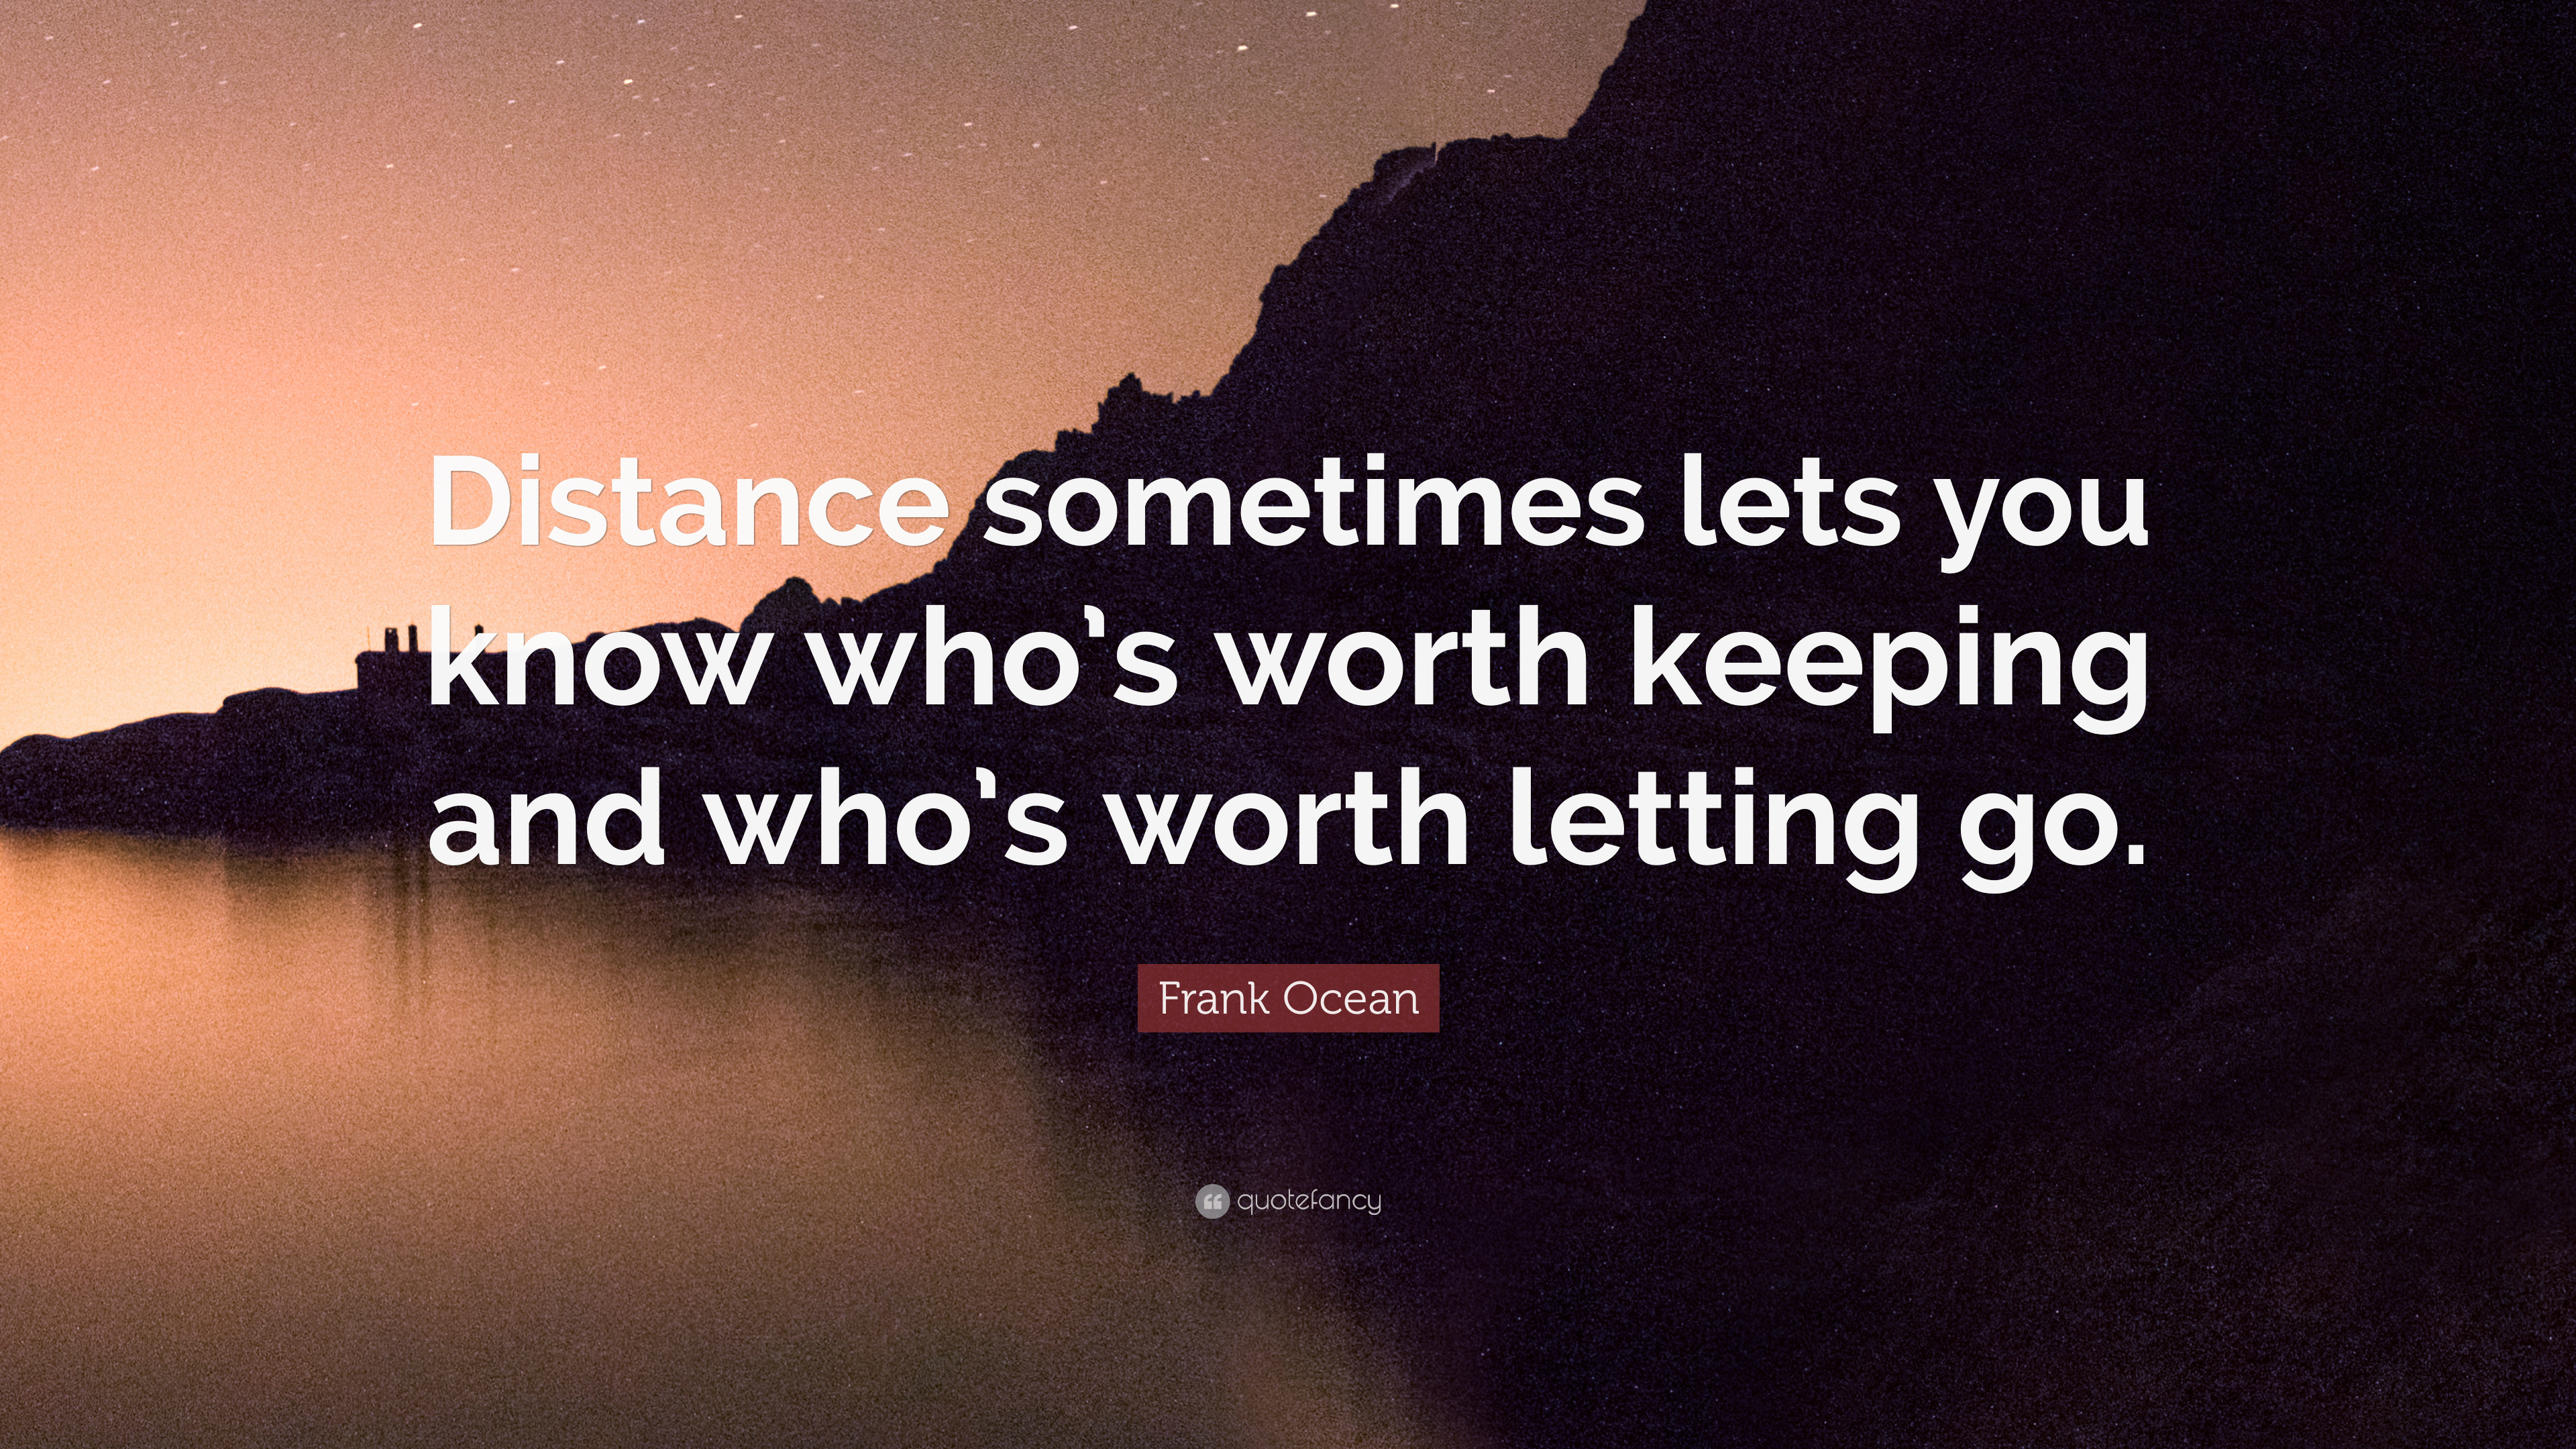 3840x2160 Frank Ocean Quote: “Distance sometimes lets you know who's worth keeping  and who's worth